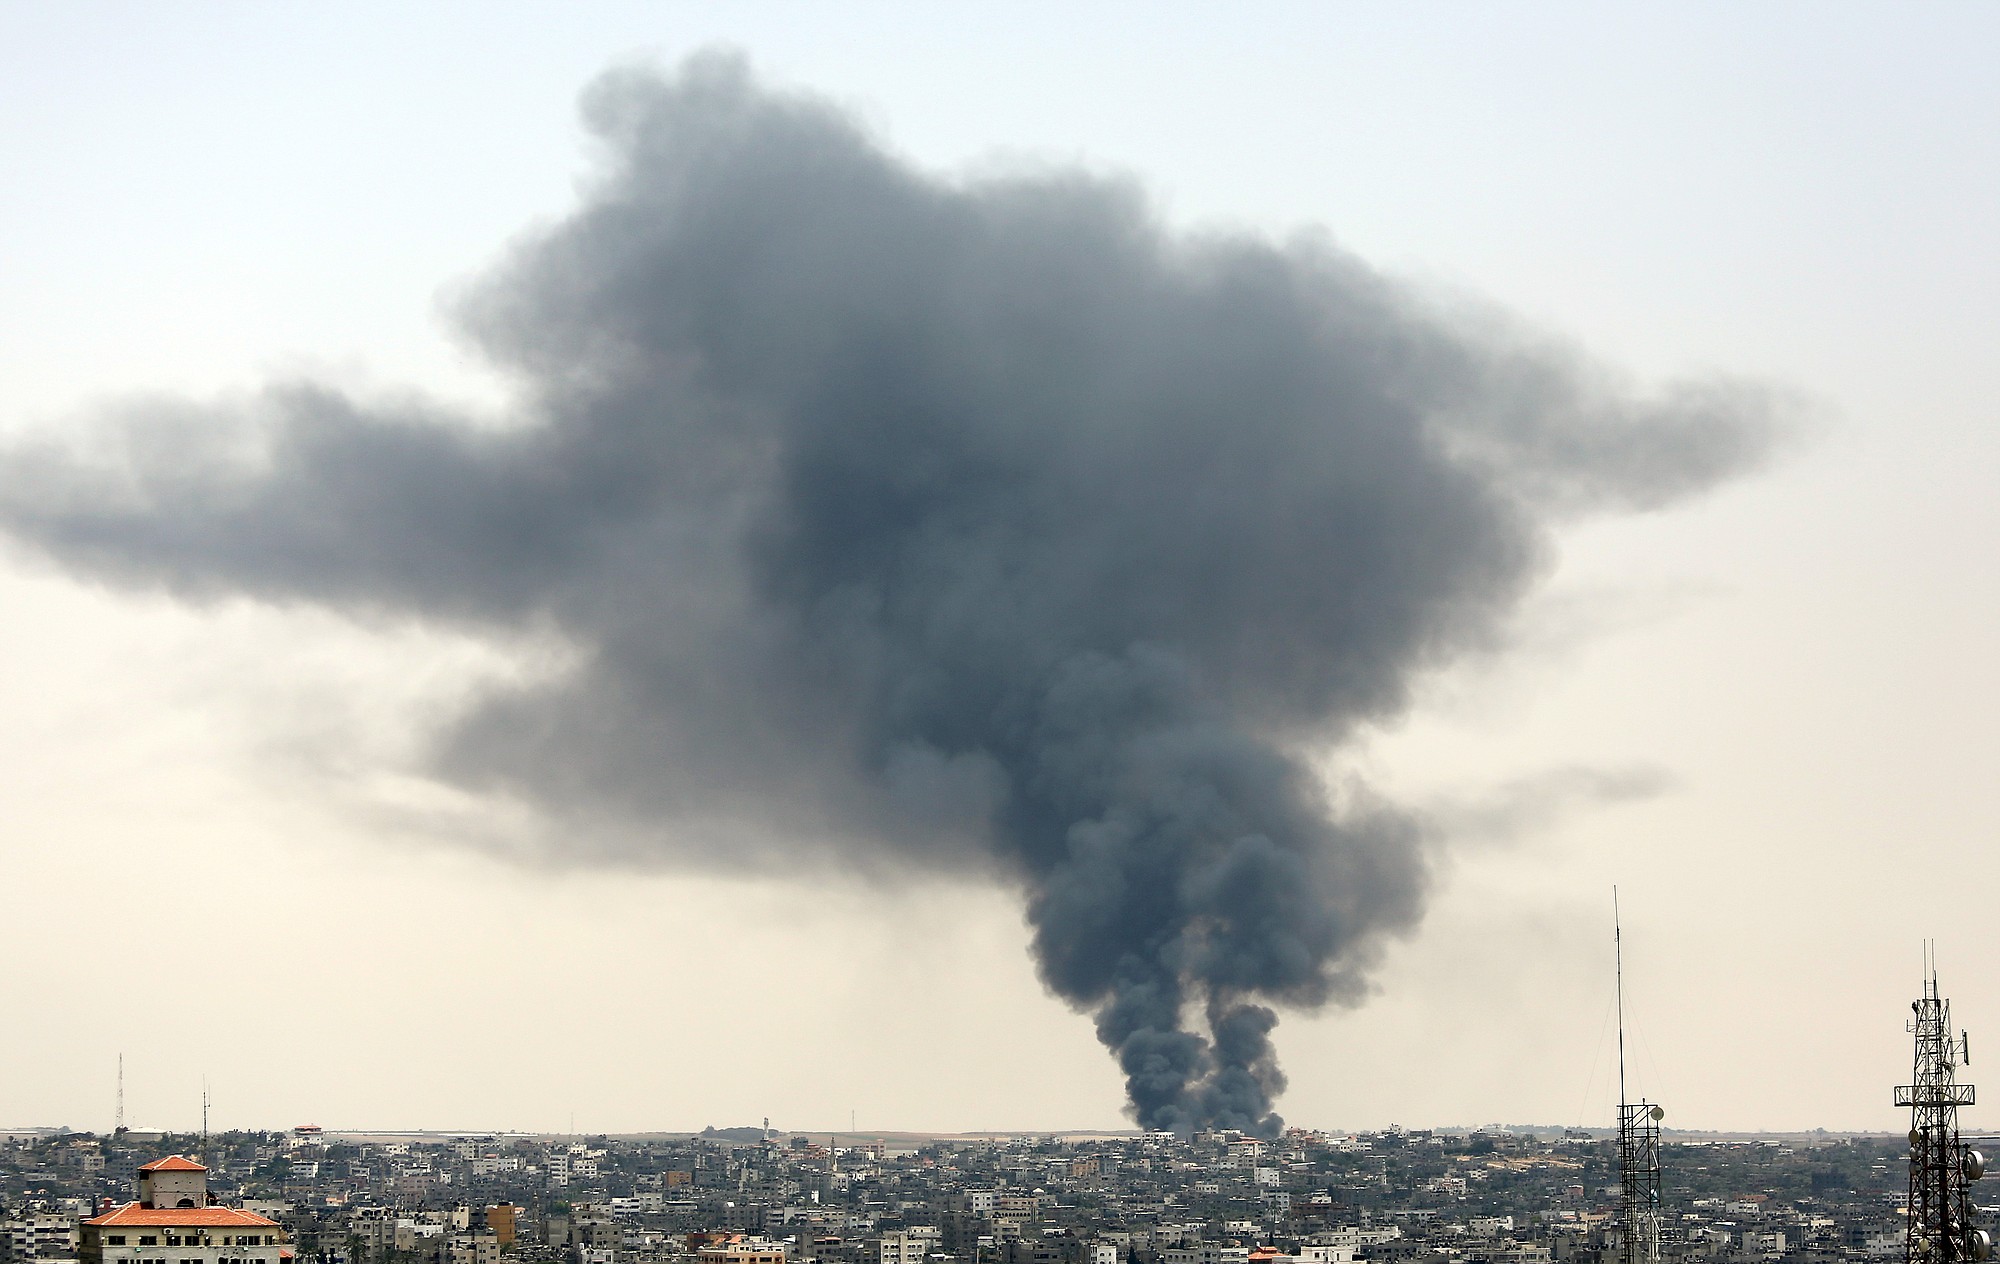 Smoke rises after a cargo crossing between Israel and Gaza was shelled on Saturday, July 12, 2014. Israeli airstrikes targeting Hamas in Gaza hit a mosque and a center for the disabled where two women were killed Saturday, raising the Palestinian death toll from the offensive to more than 120, Palestinian officials said.